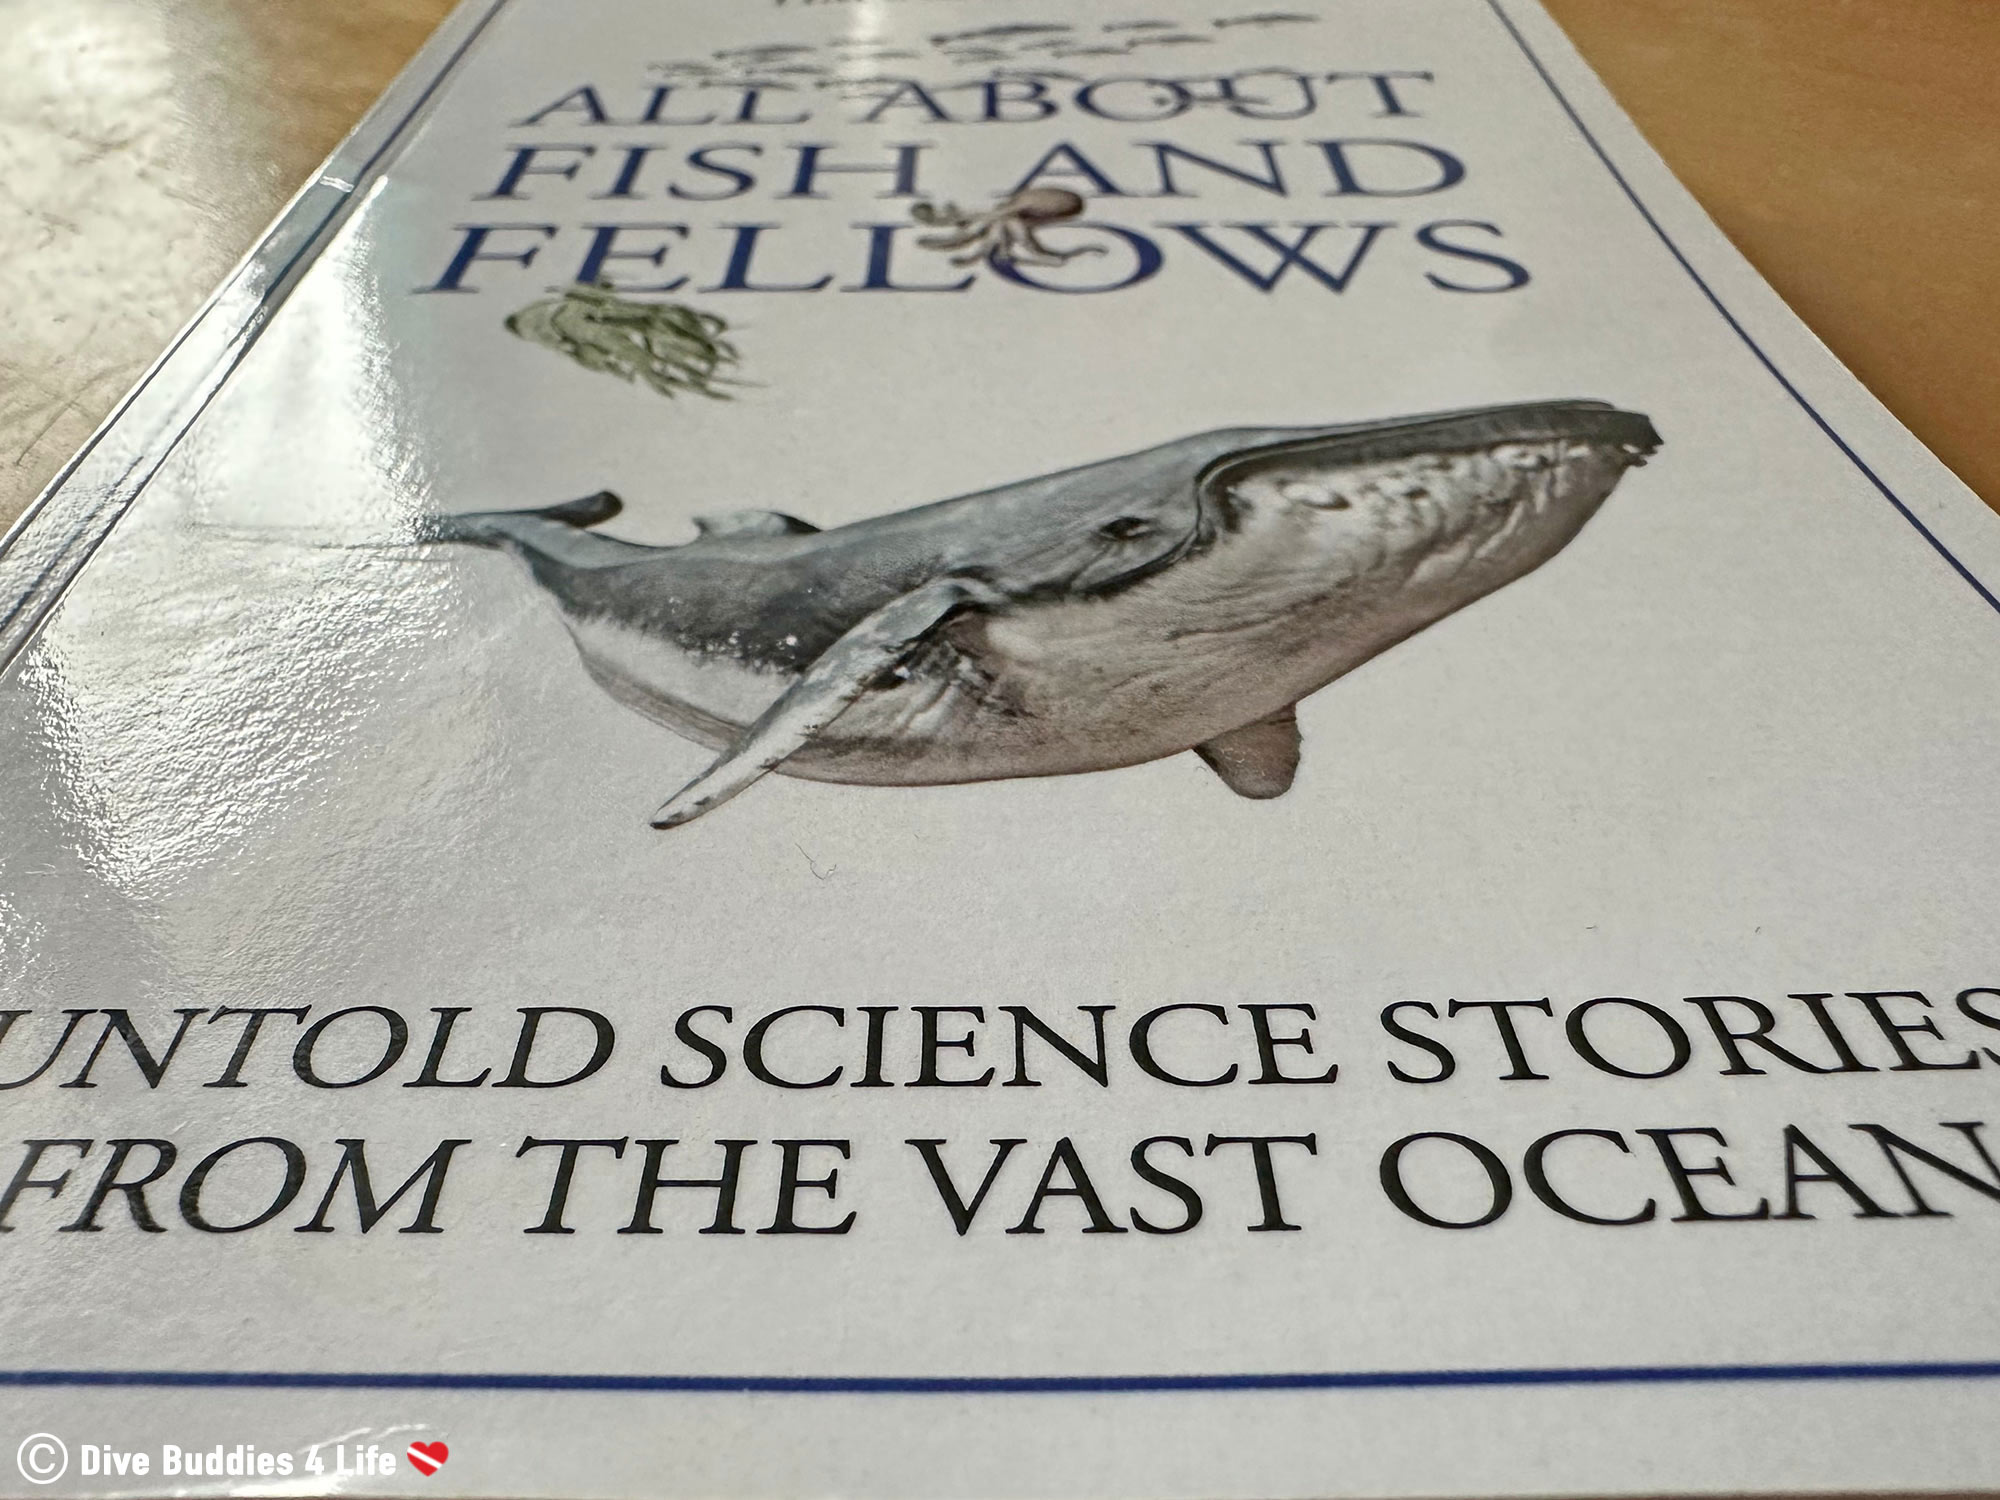 All About Fish And Fellow Novel Cover By Tim Schröder With A Humpback Whale Swimming